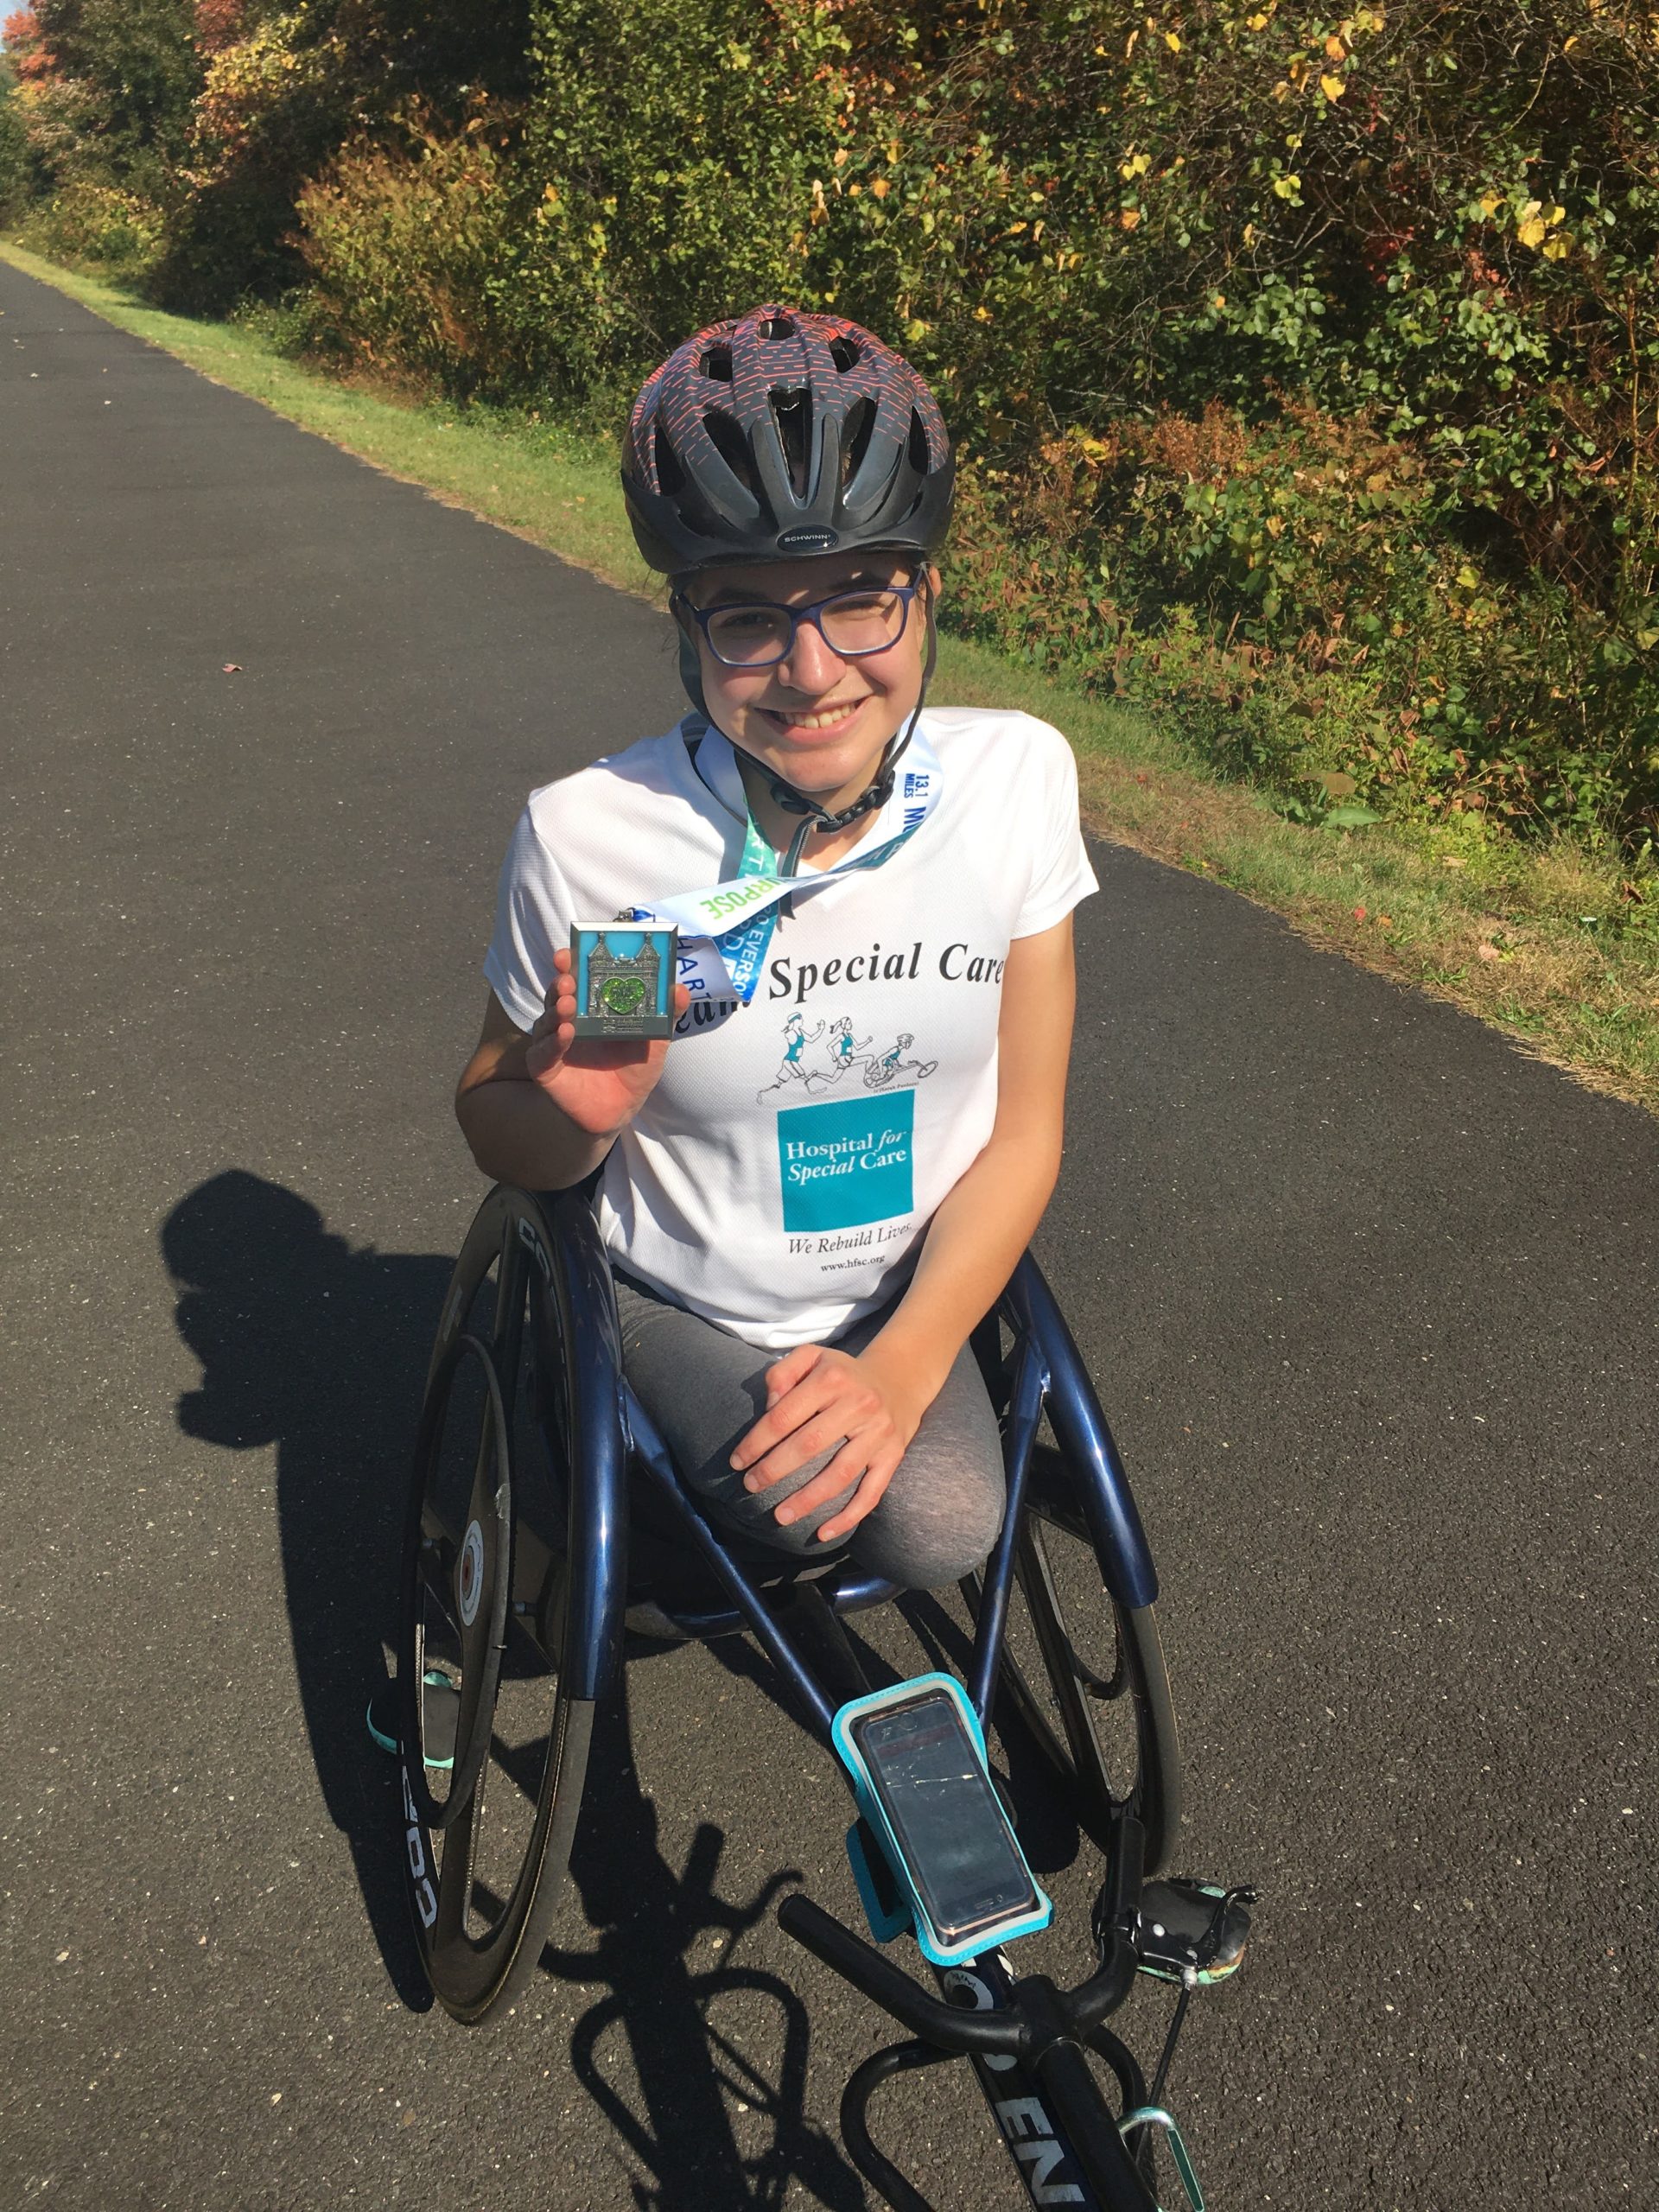 Female athlete in a racing wheelchair smiling at the camera